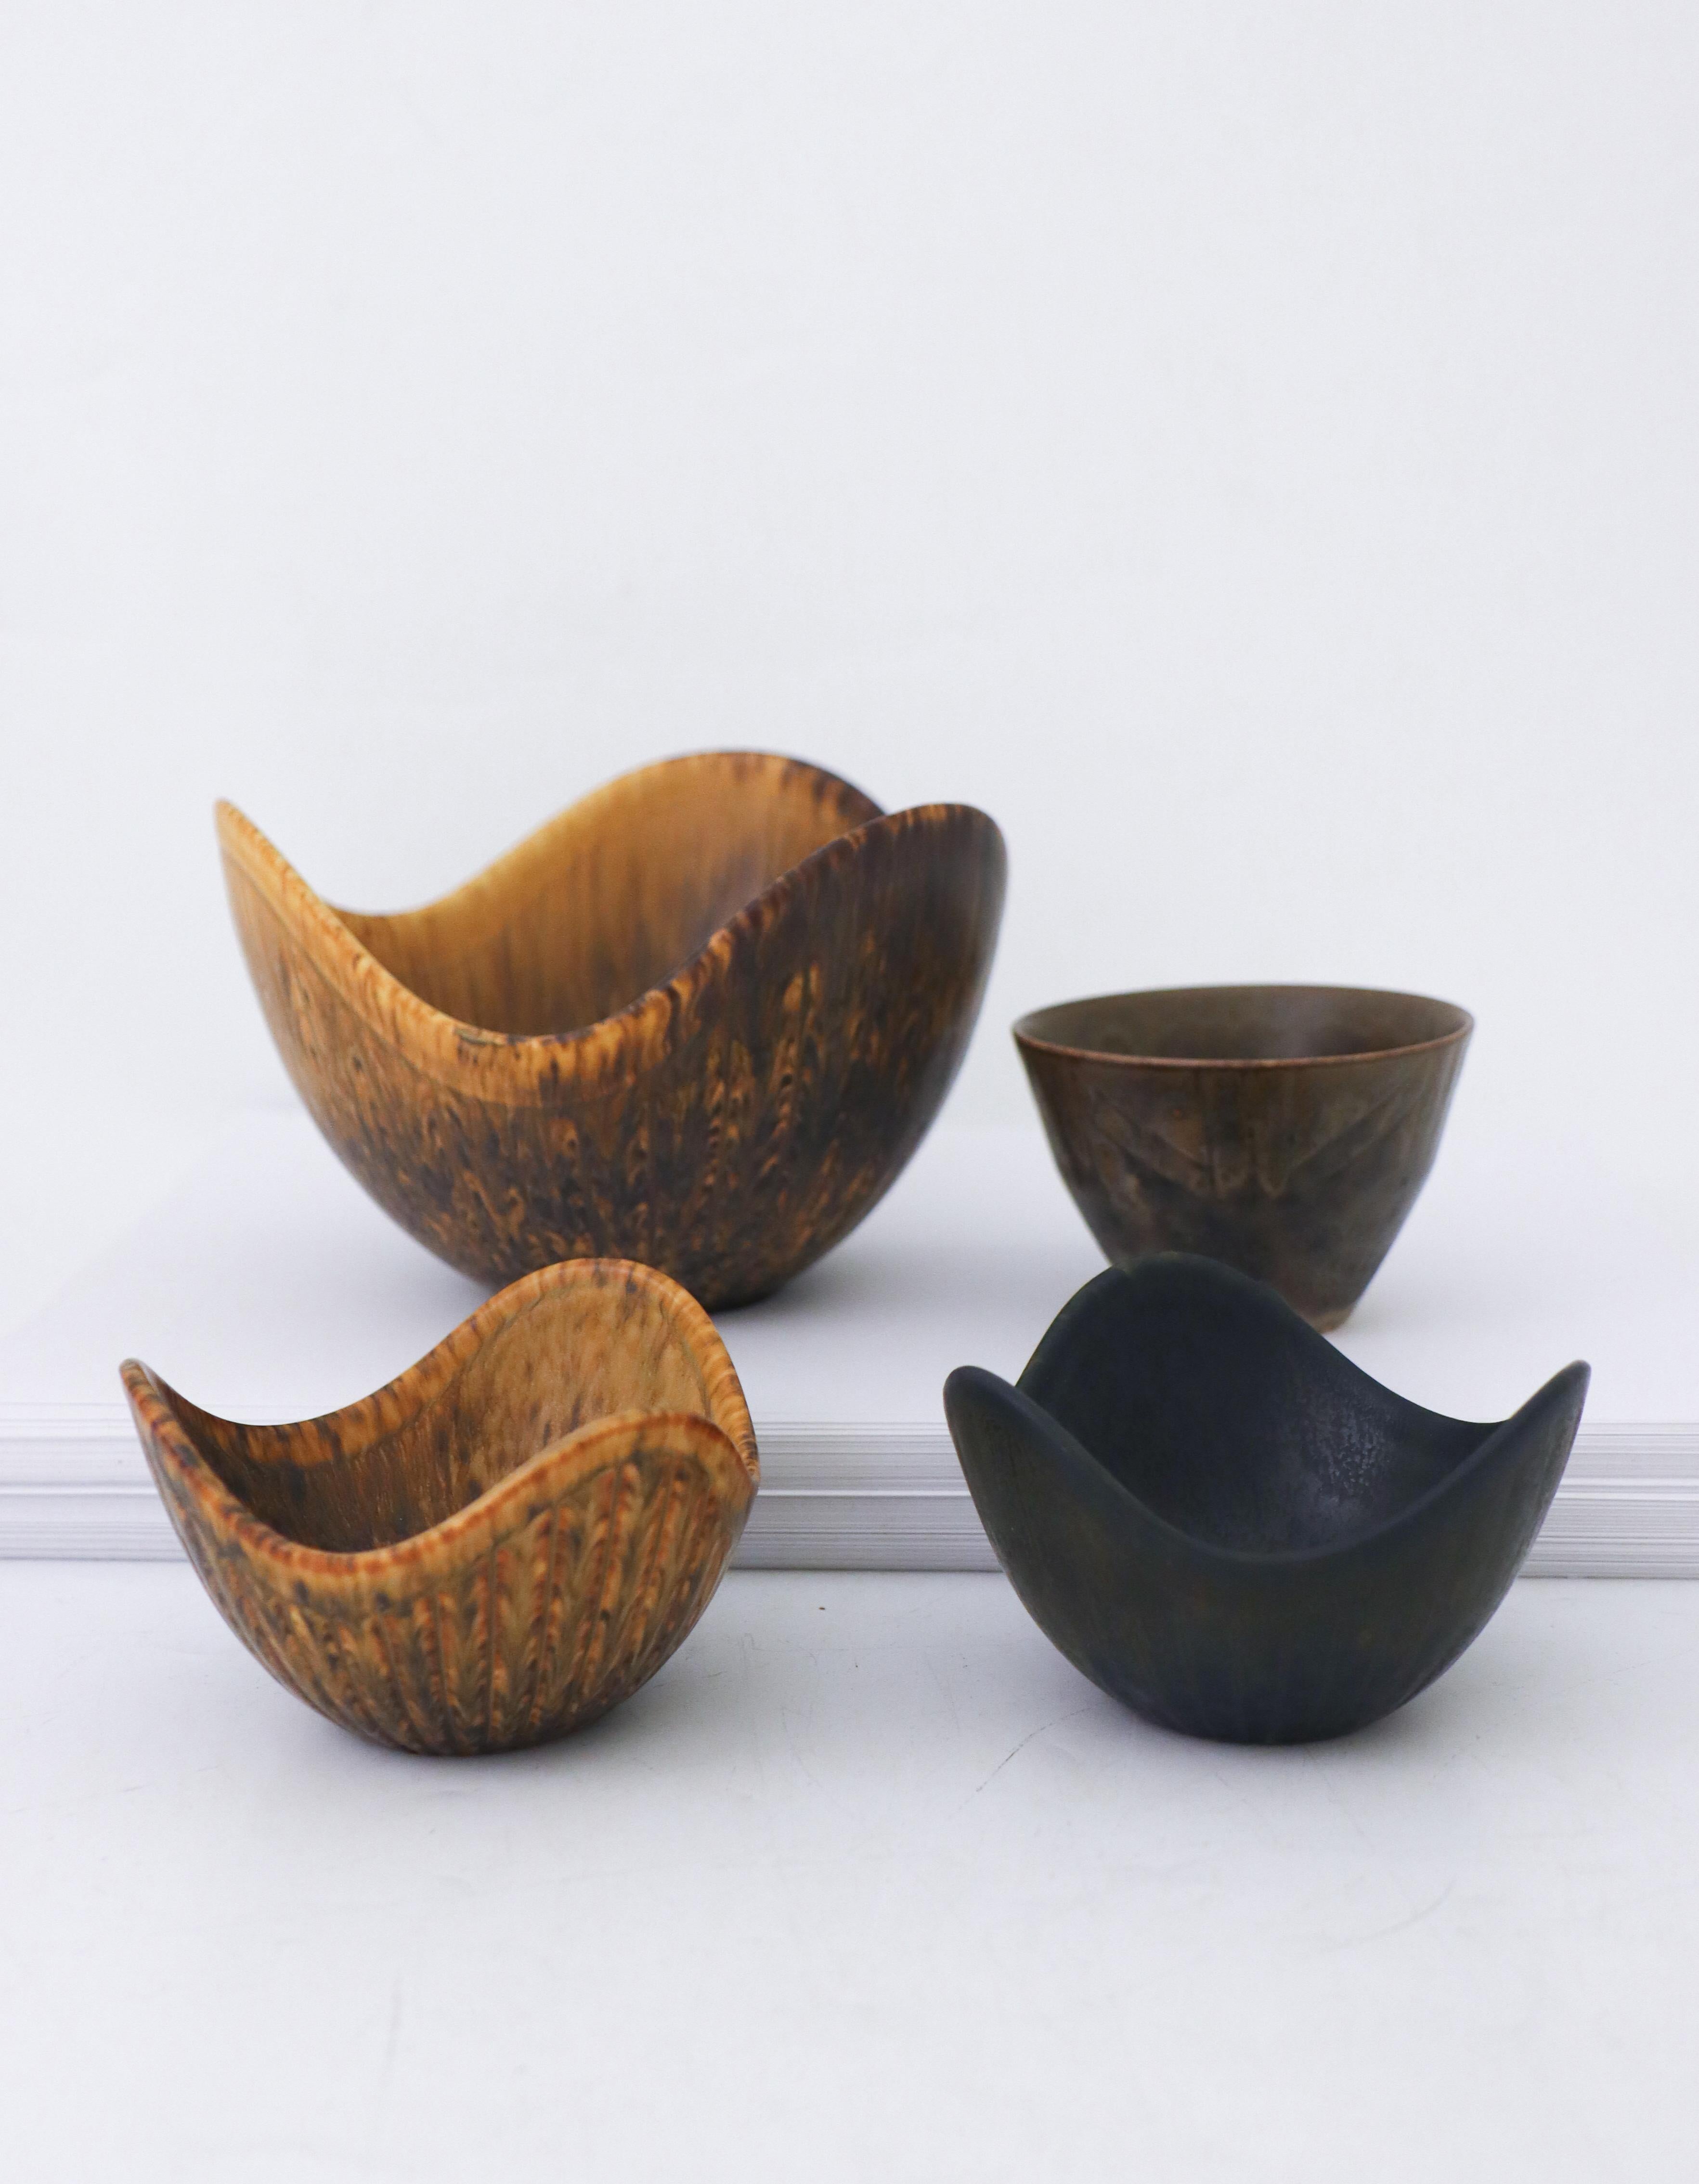 A group of four bowls designed by Gunnar Nylund and Carl-Harry Stålhane at Rörstrand. The three bowls in the same shape are designed by Gunnar Nylund, the larger one is 13.5 cm in diameter and the two smaller once are 8.5 cm. The gray bowl to the